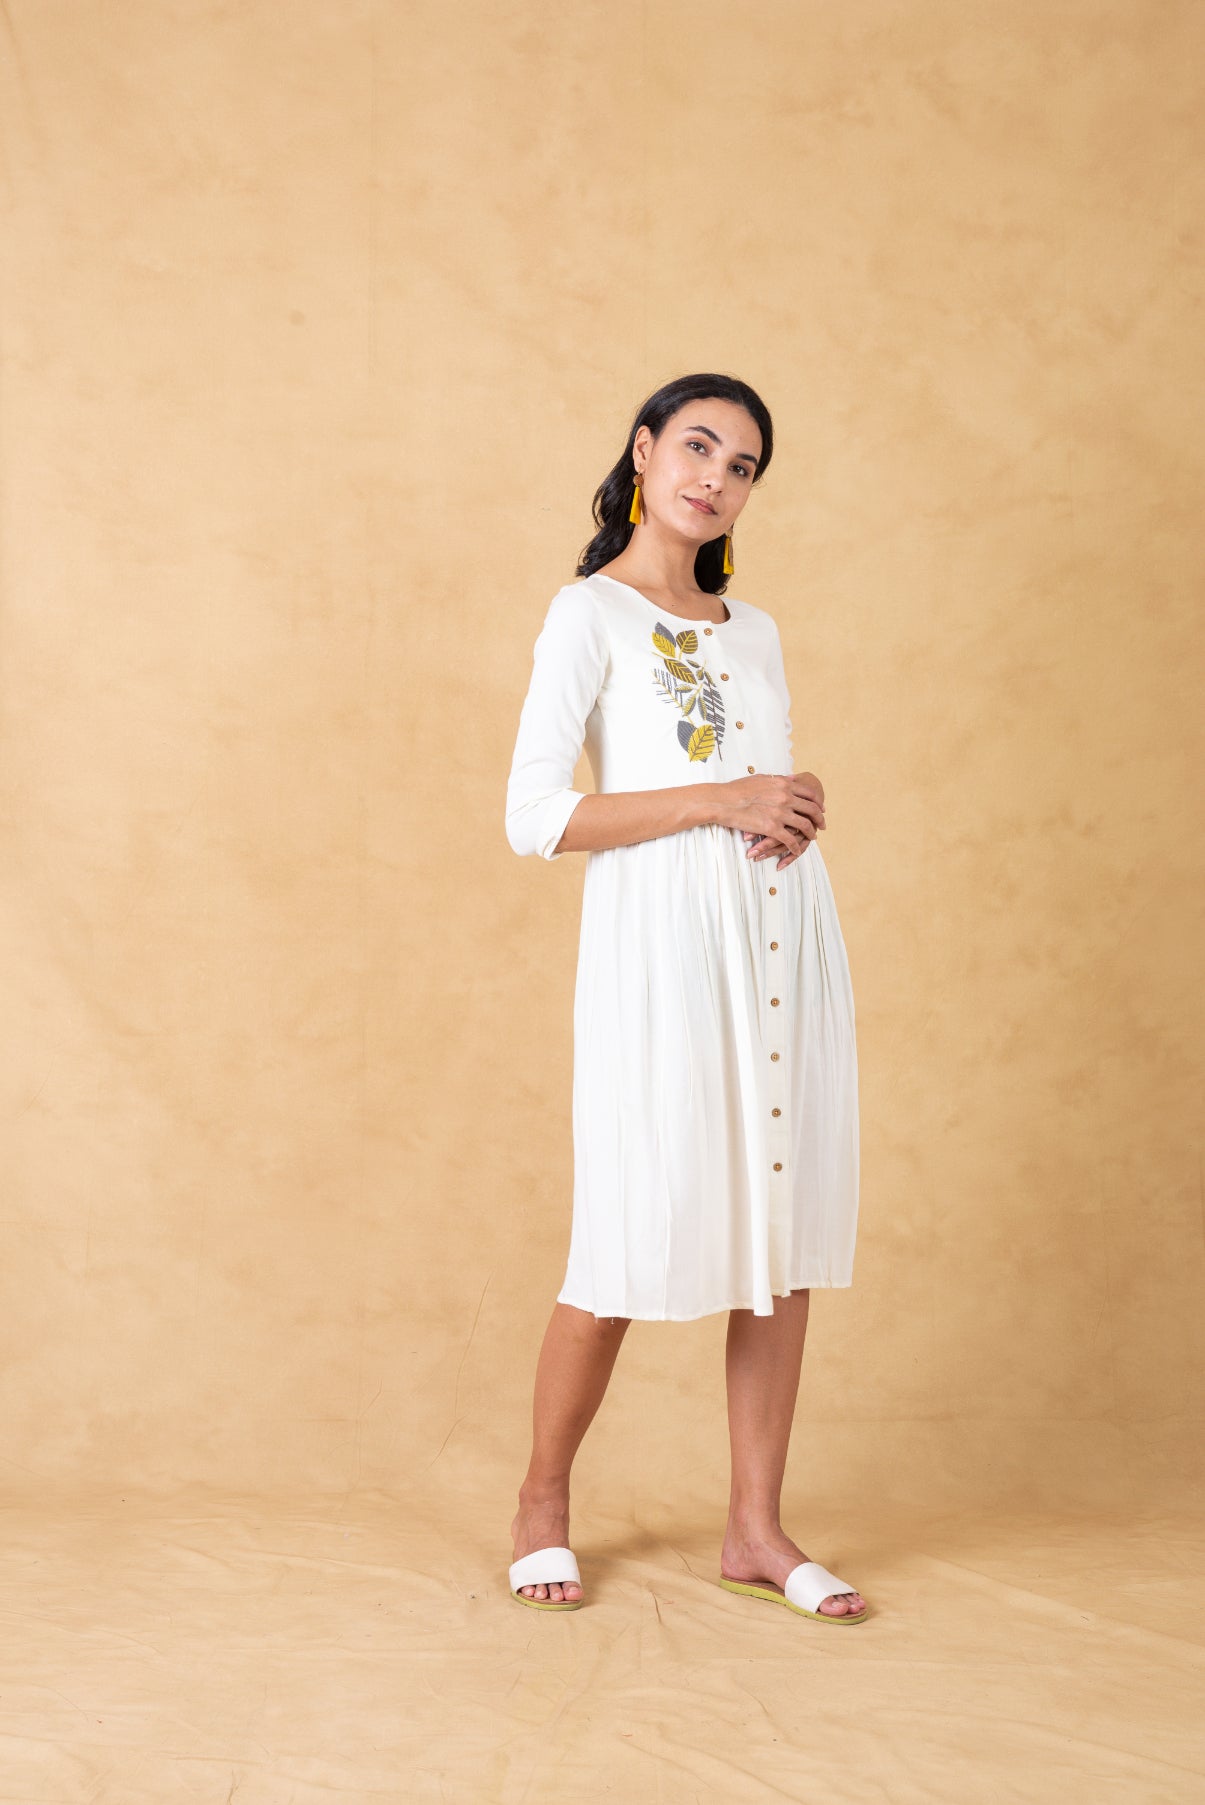 White Embroidered Dress